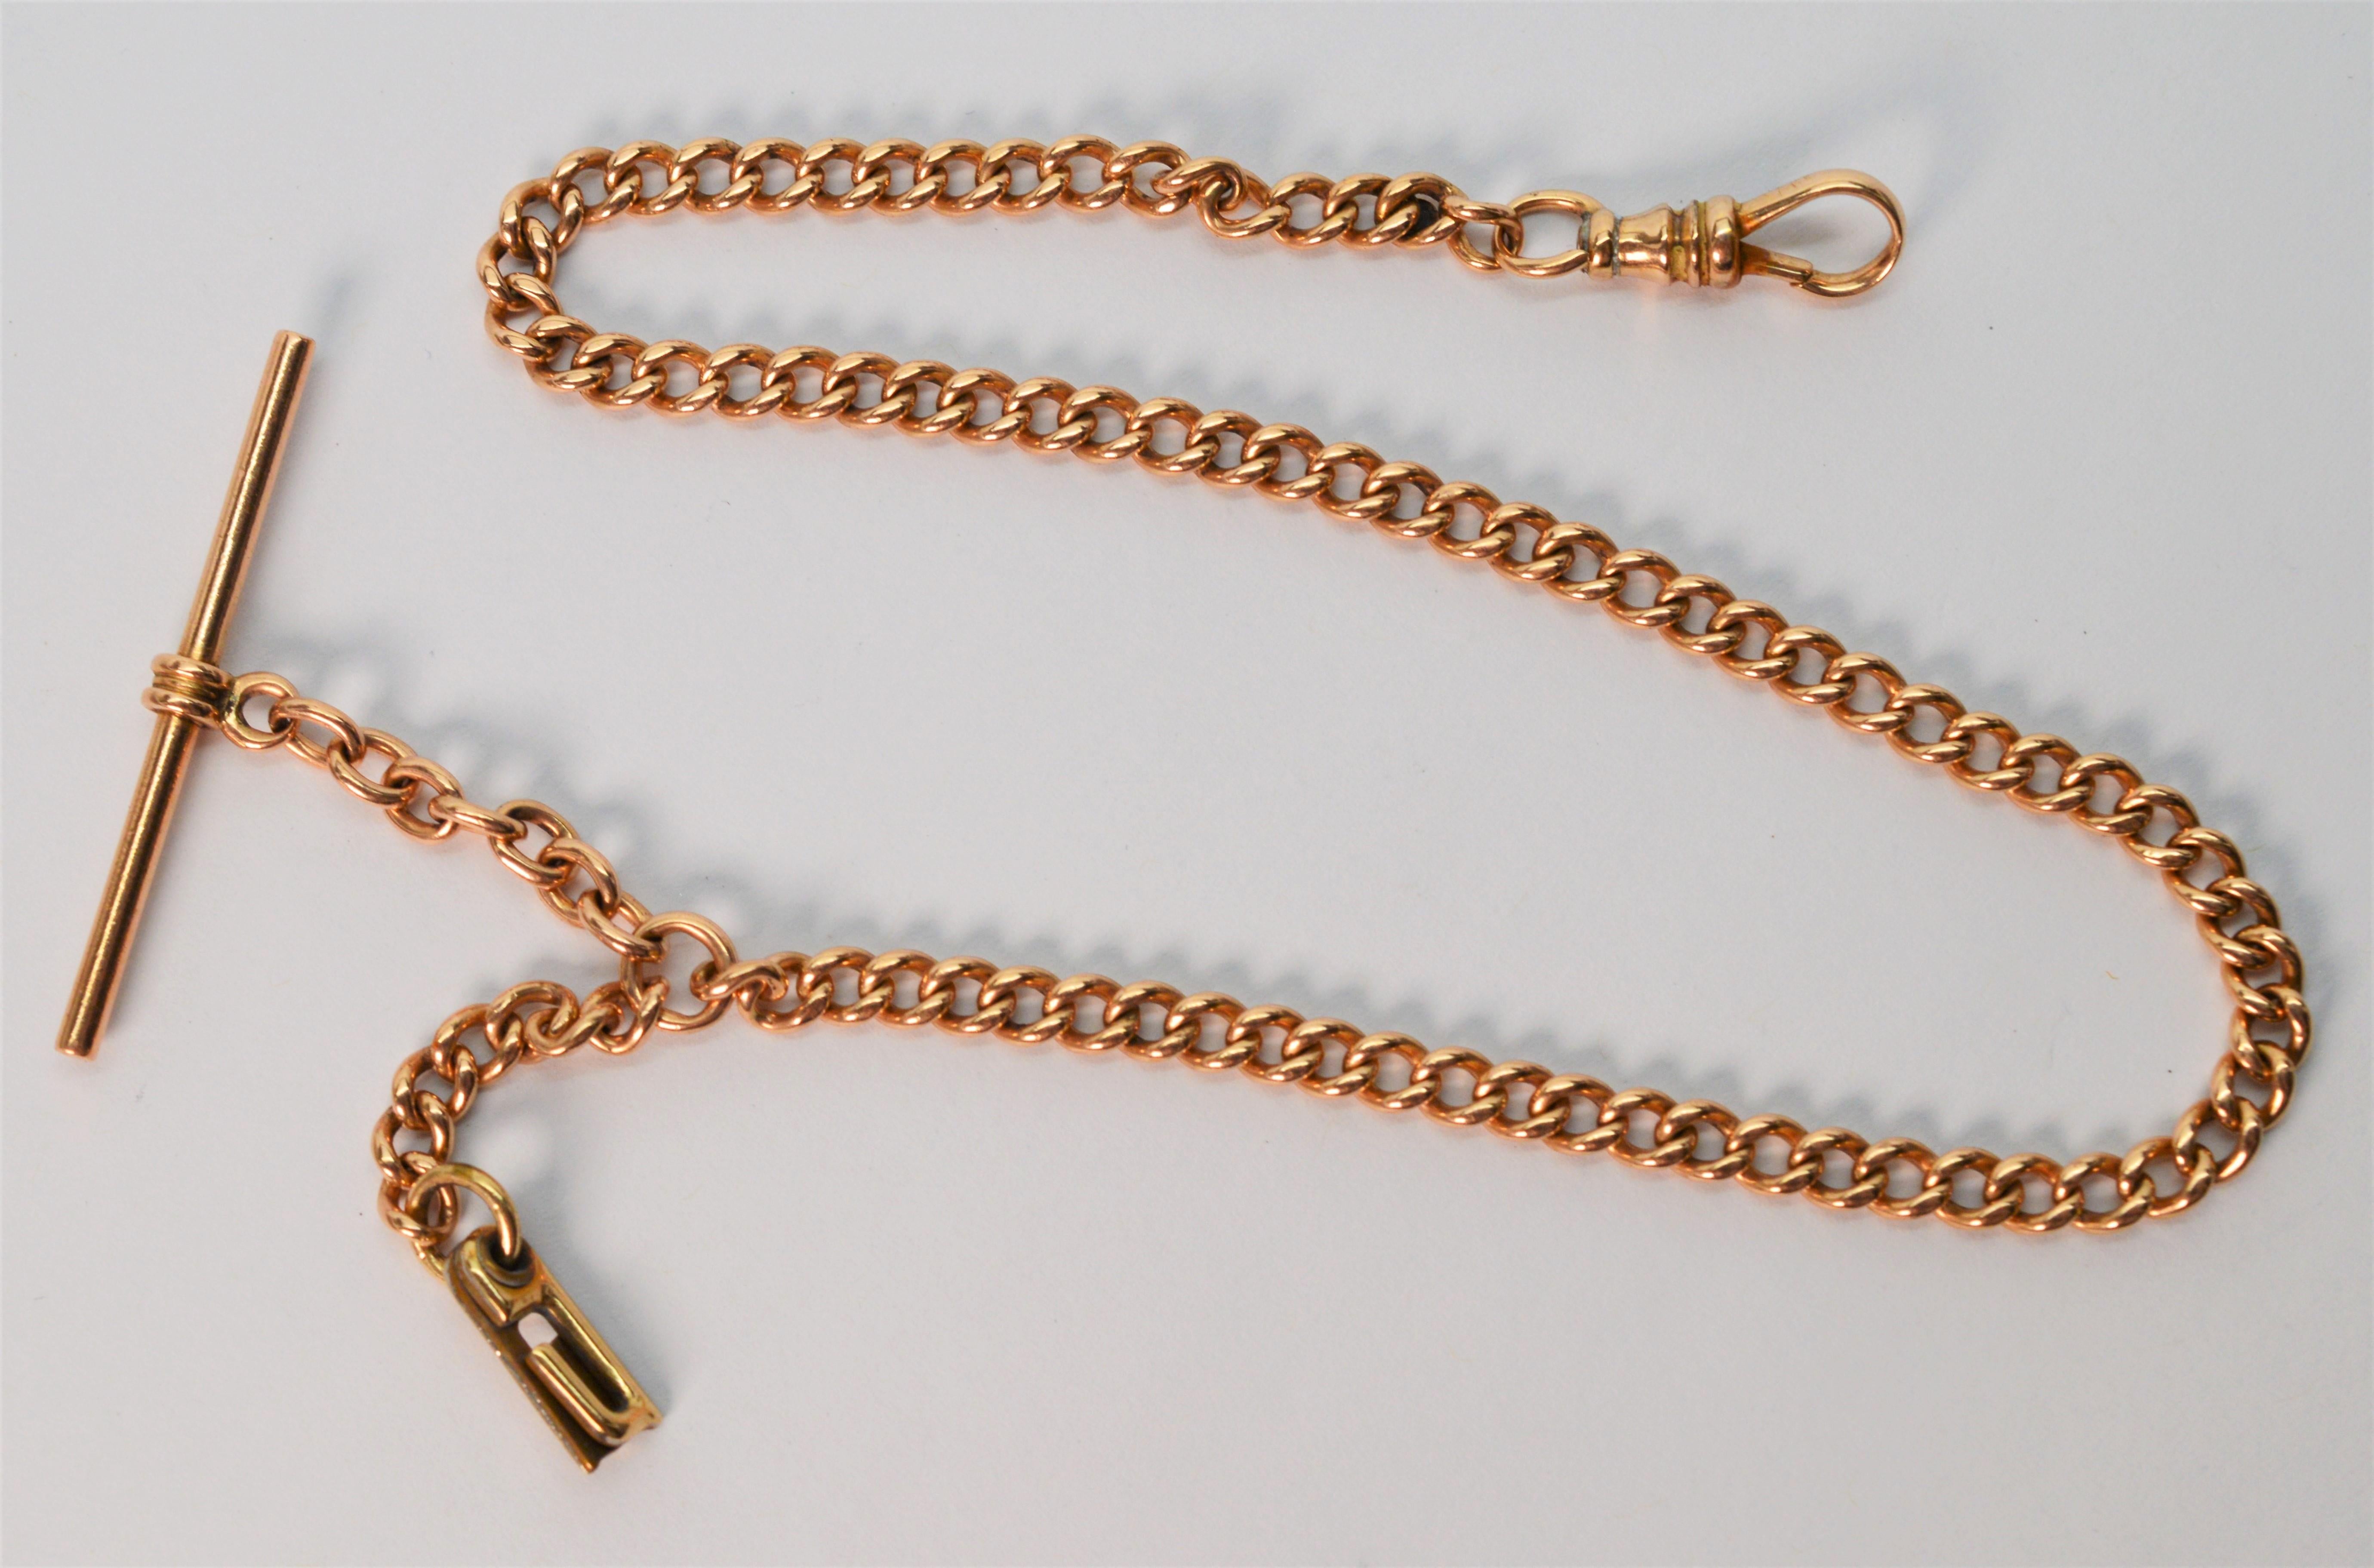 Perfect accessory for pocket watch enthusiasts, this twelve inch antique pocket watch chain made of 14K yellow gold has the perfect set up with a T bar for attachment to apparel, dog clip for attachment to a favorite pocket watch and hard to find